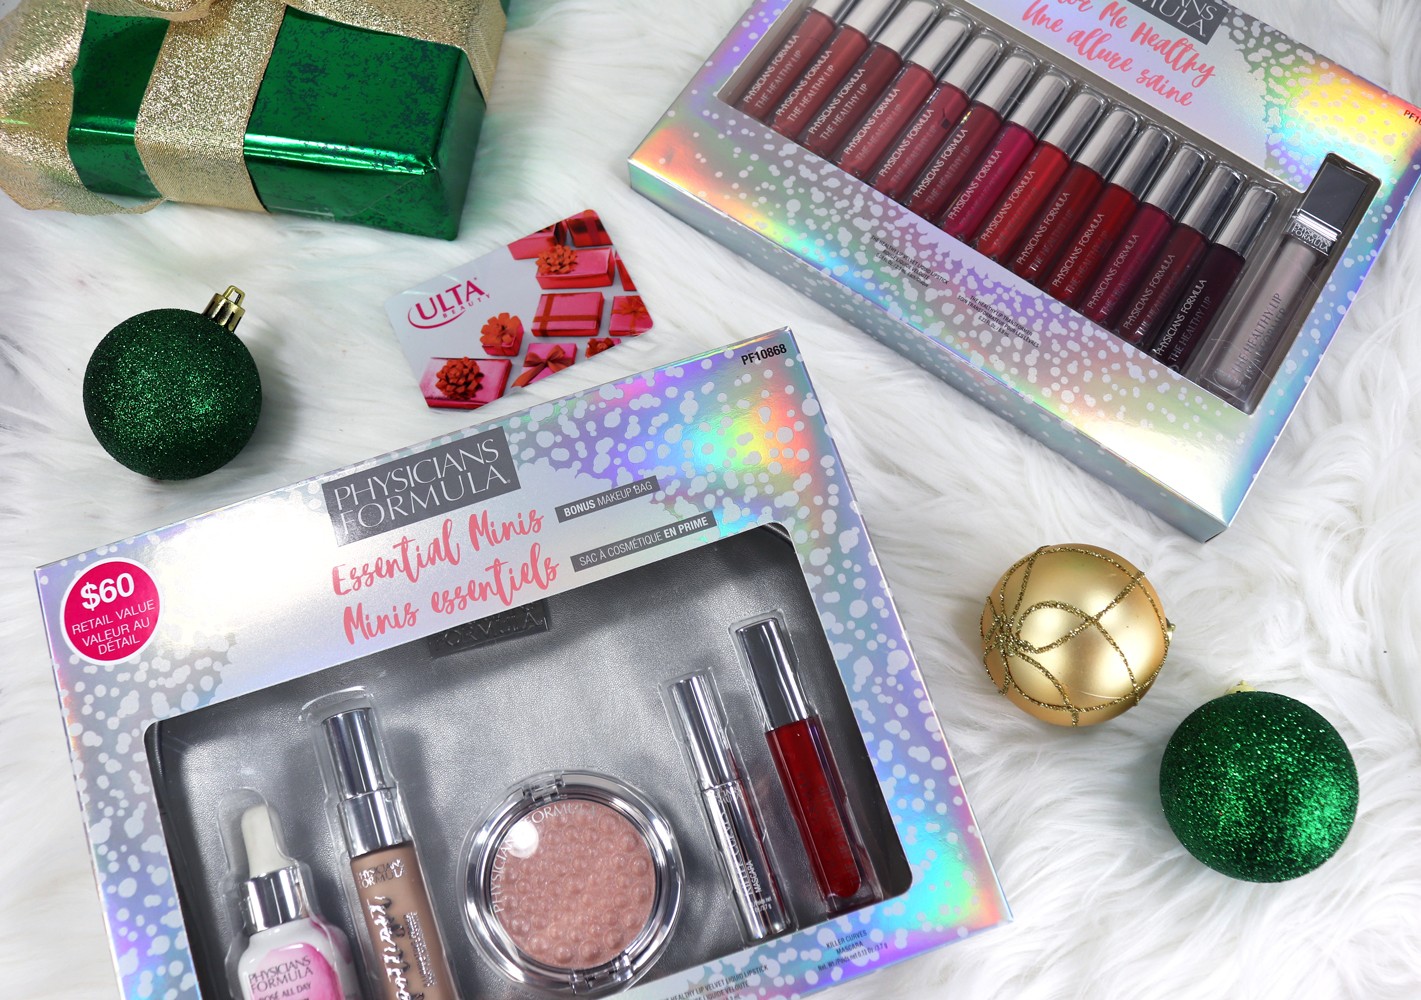 Cruelty Free Holiday Gift Guide - Physicians Formula Gift Sets